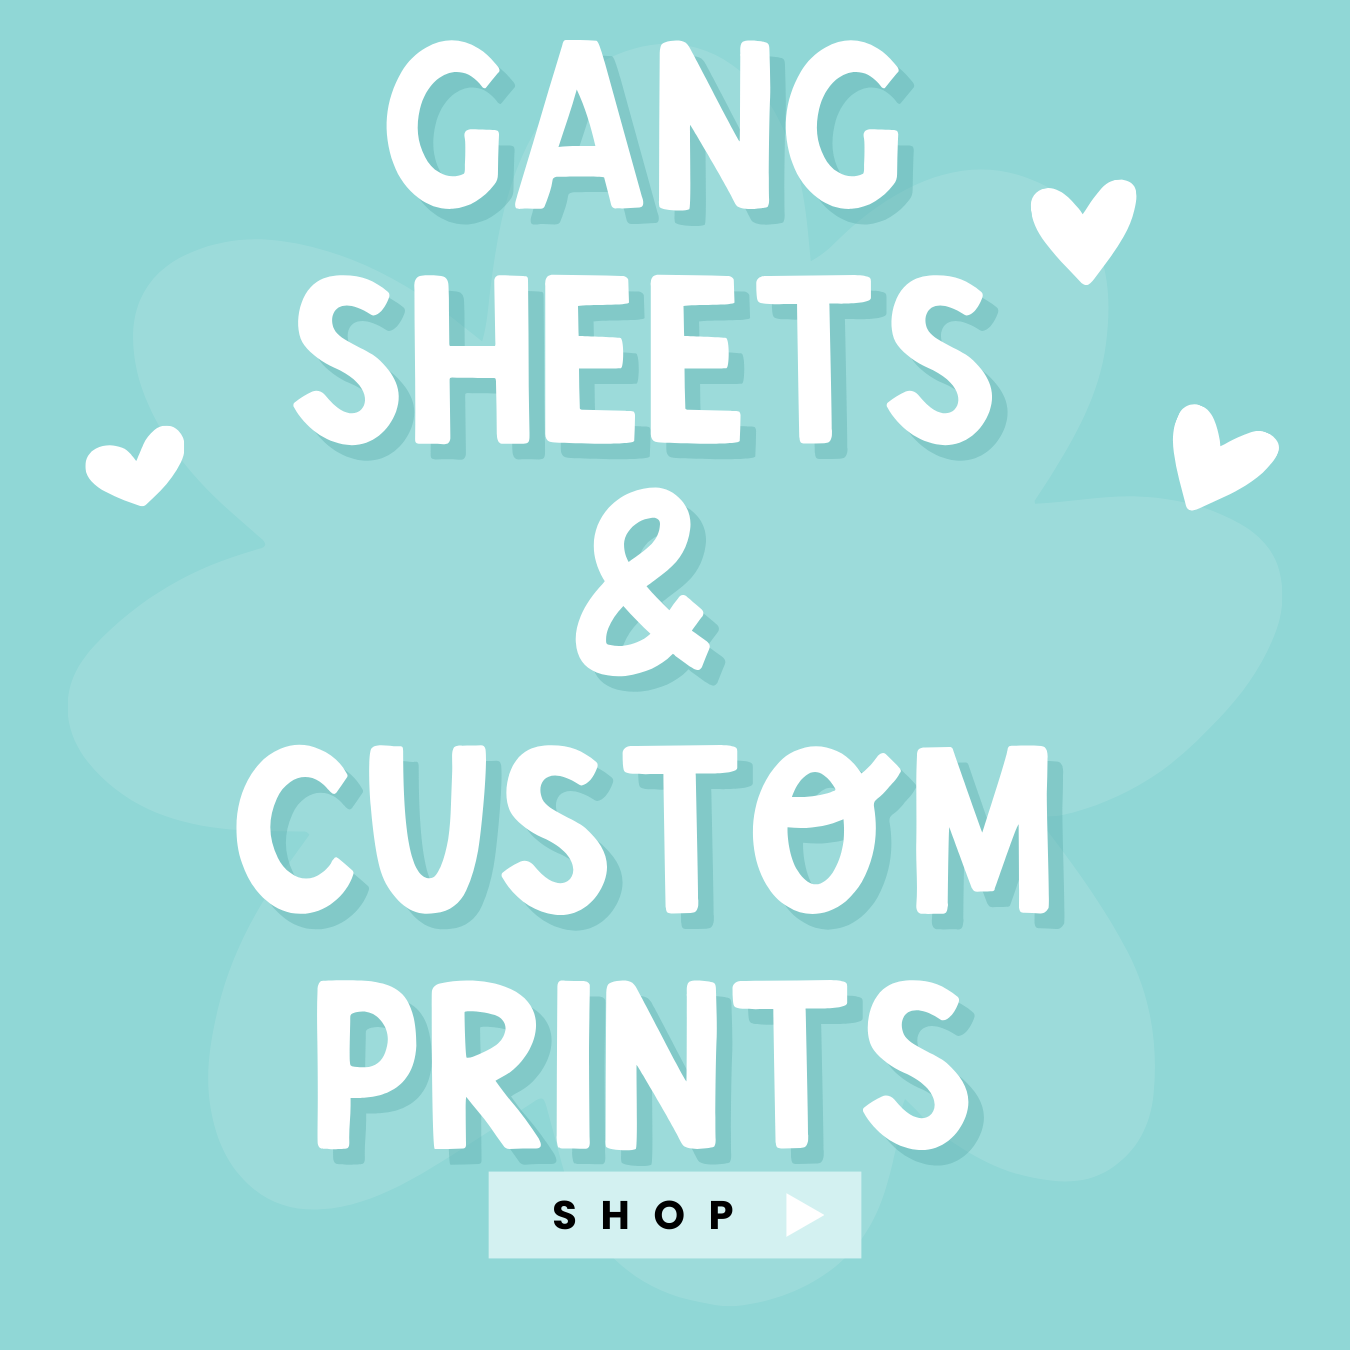 Print Your Own Designs & Gang Sheets